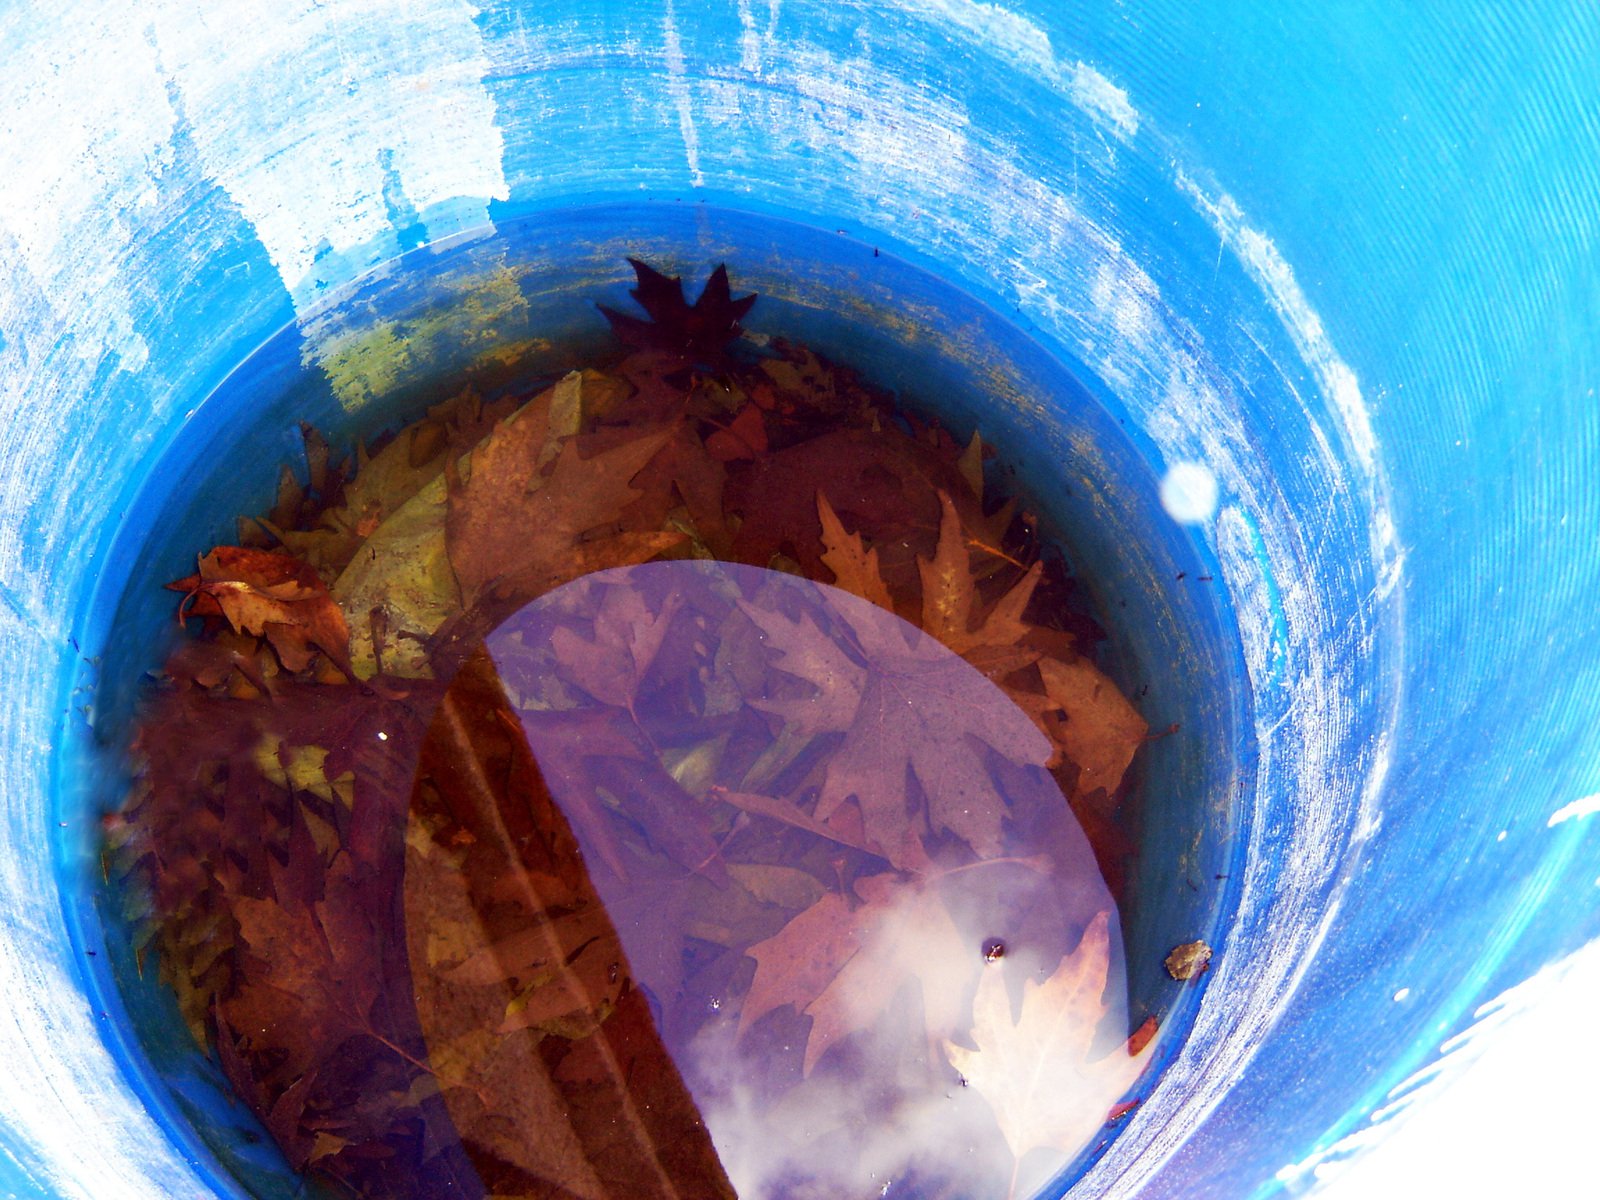 there is water that has been used as the bottom of a blue barrel